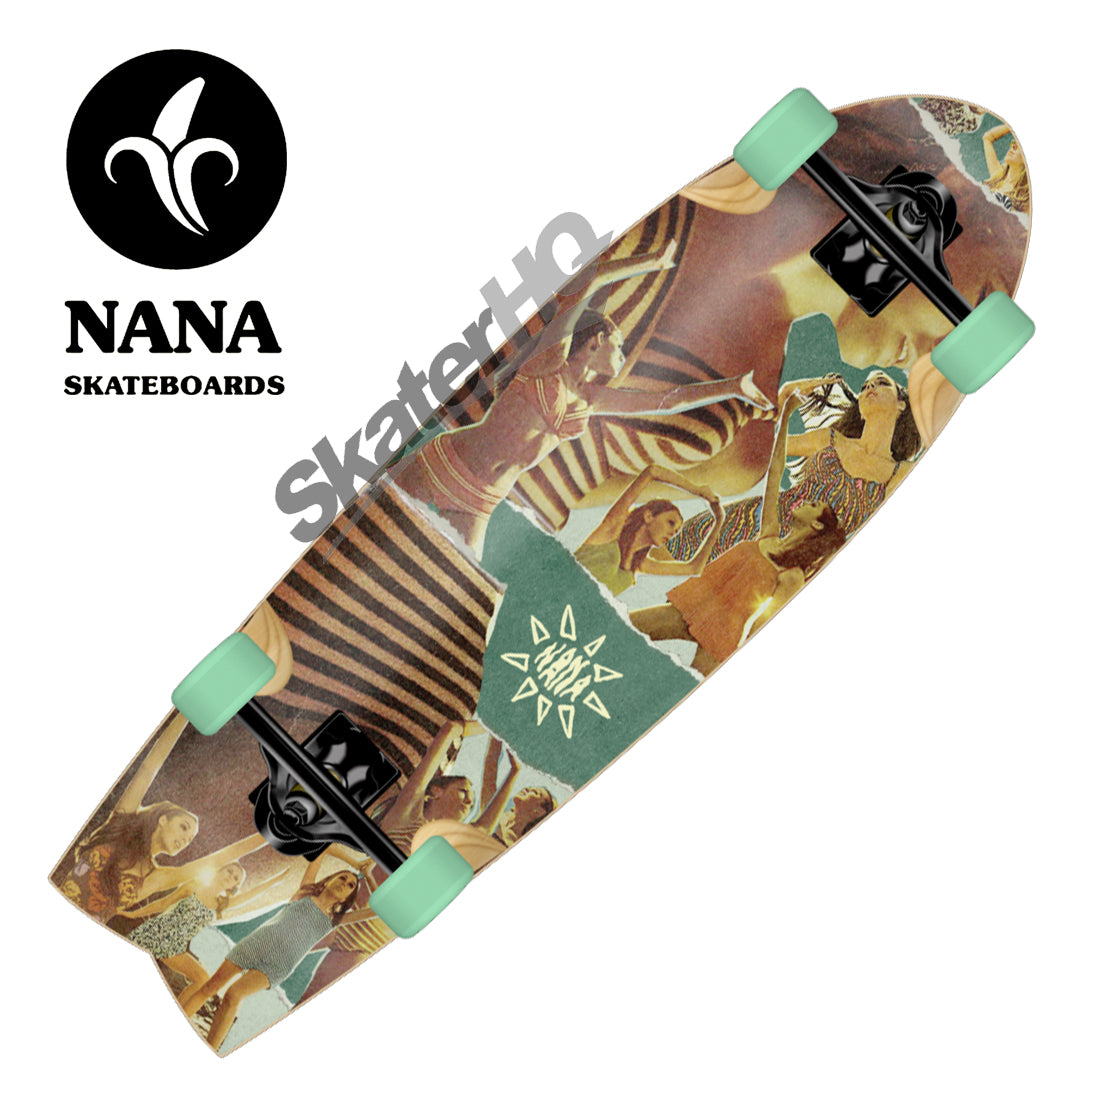 Nana Mushburger Sun Worshipper 32 Surfskate Complete Skateboard Compl Carving and Specialty